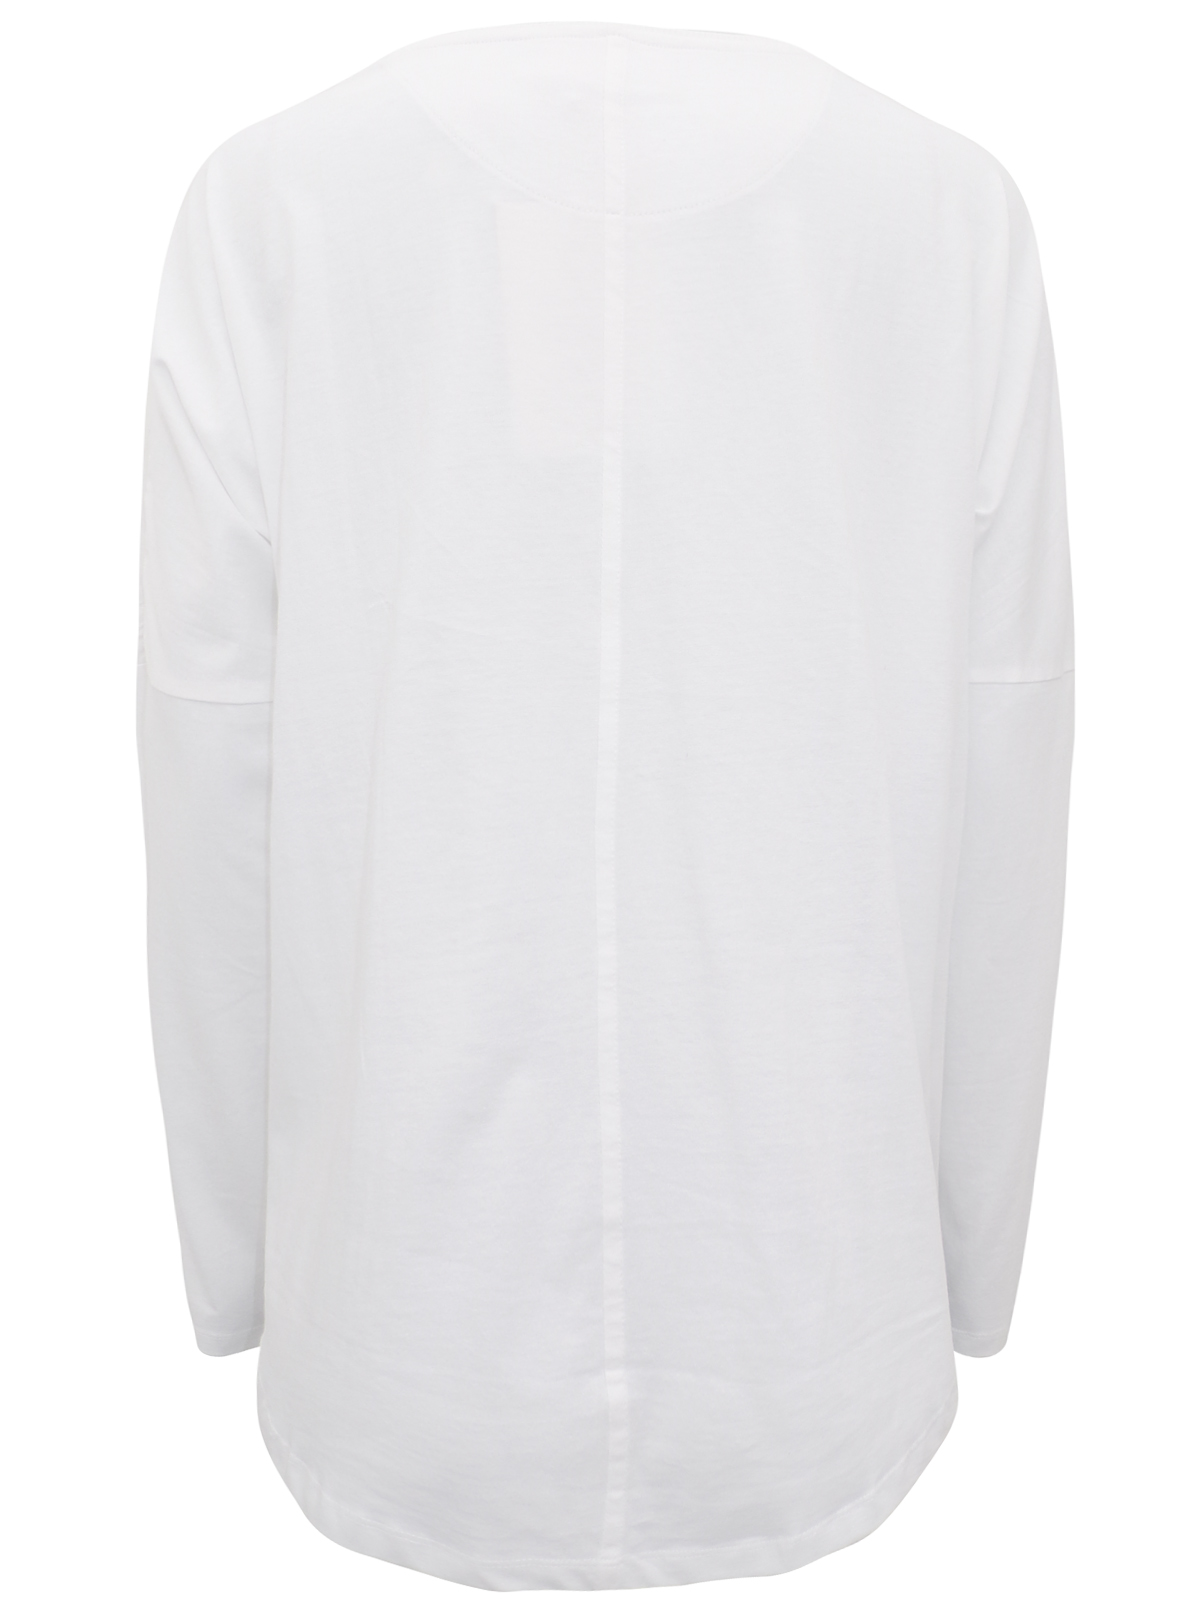 Cloth & Co - - Cloth&Co WHITE Organic Cotton Long Sleeve Top - Size 10 ...